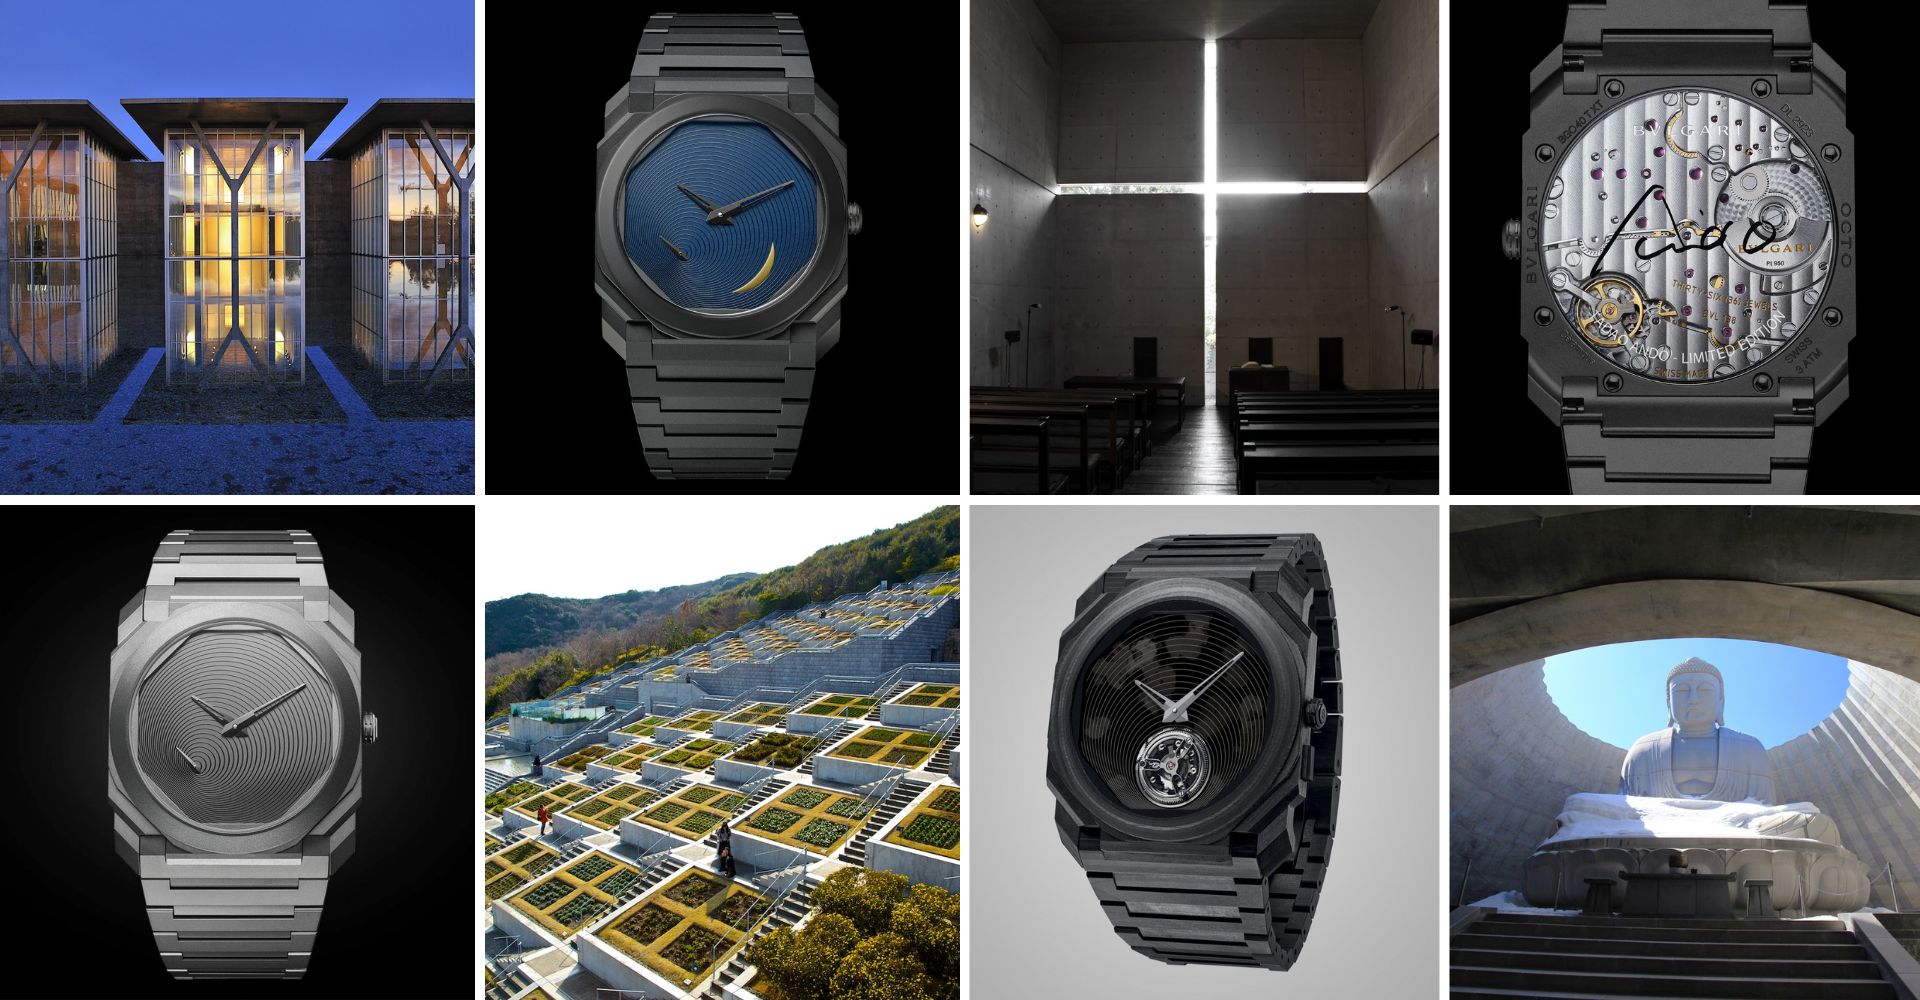 Watches & Art: How have designers and artists interpreted the watch?